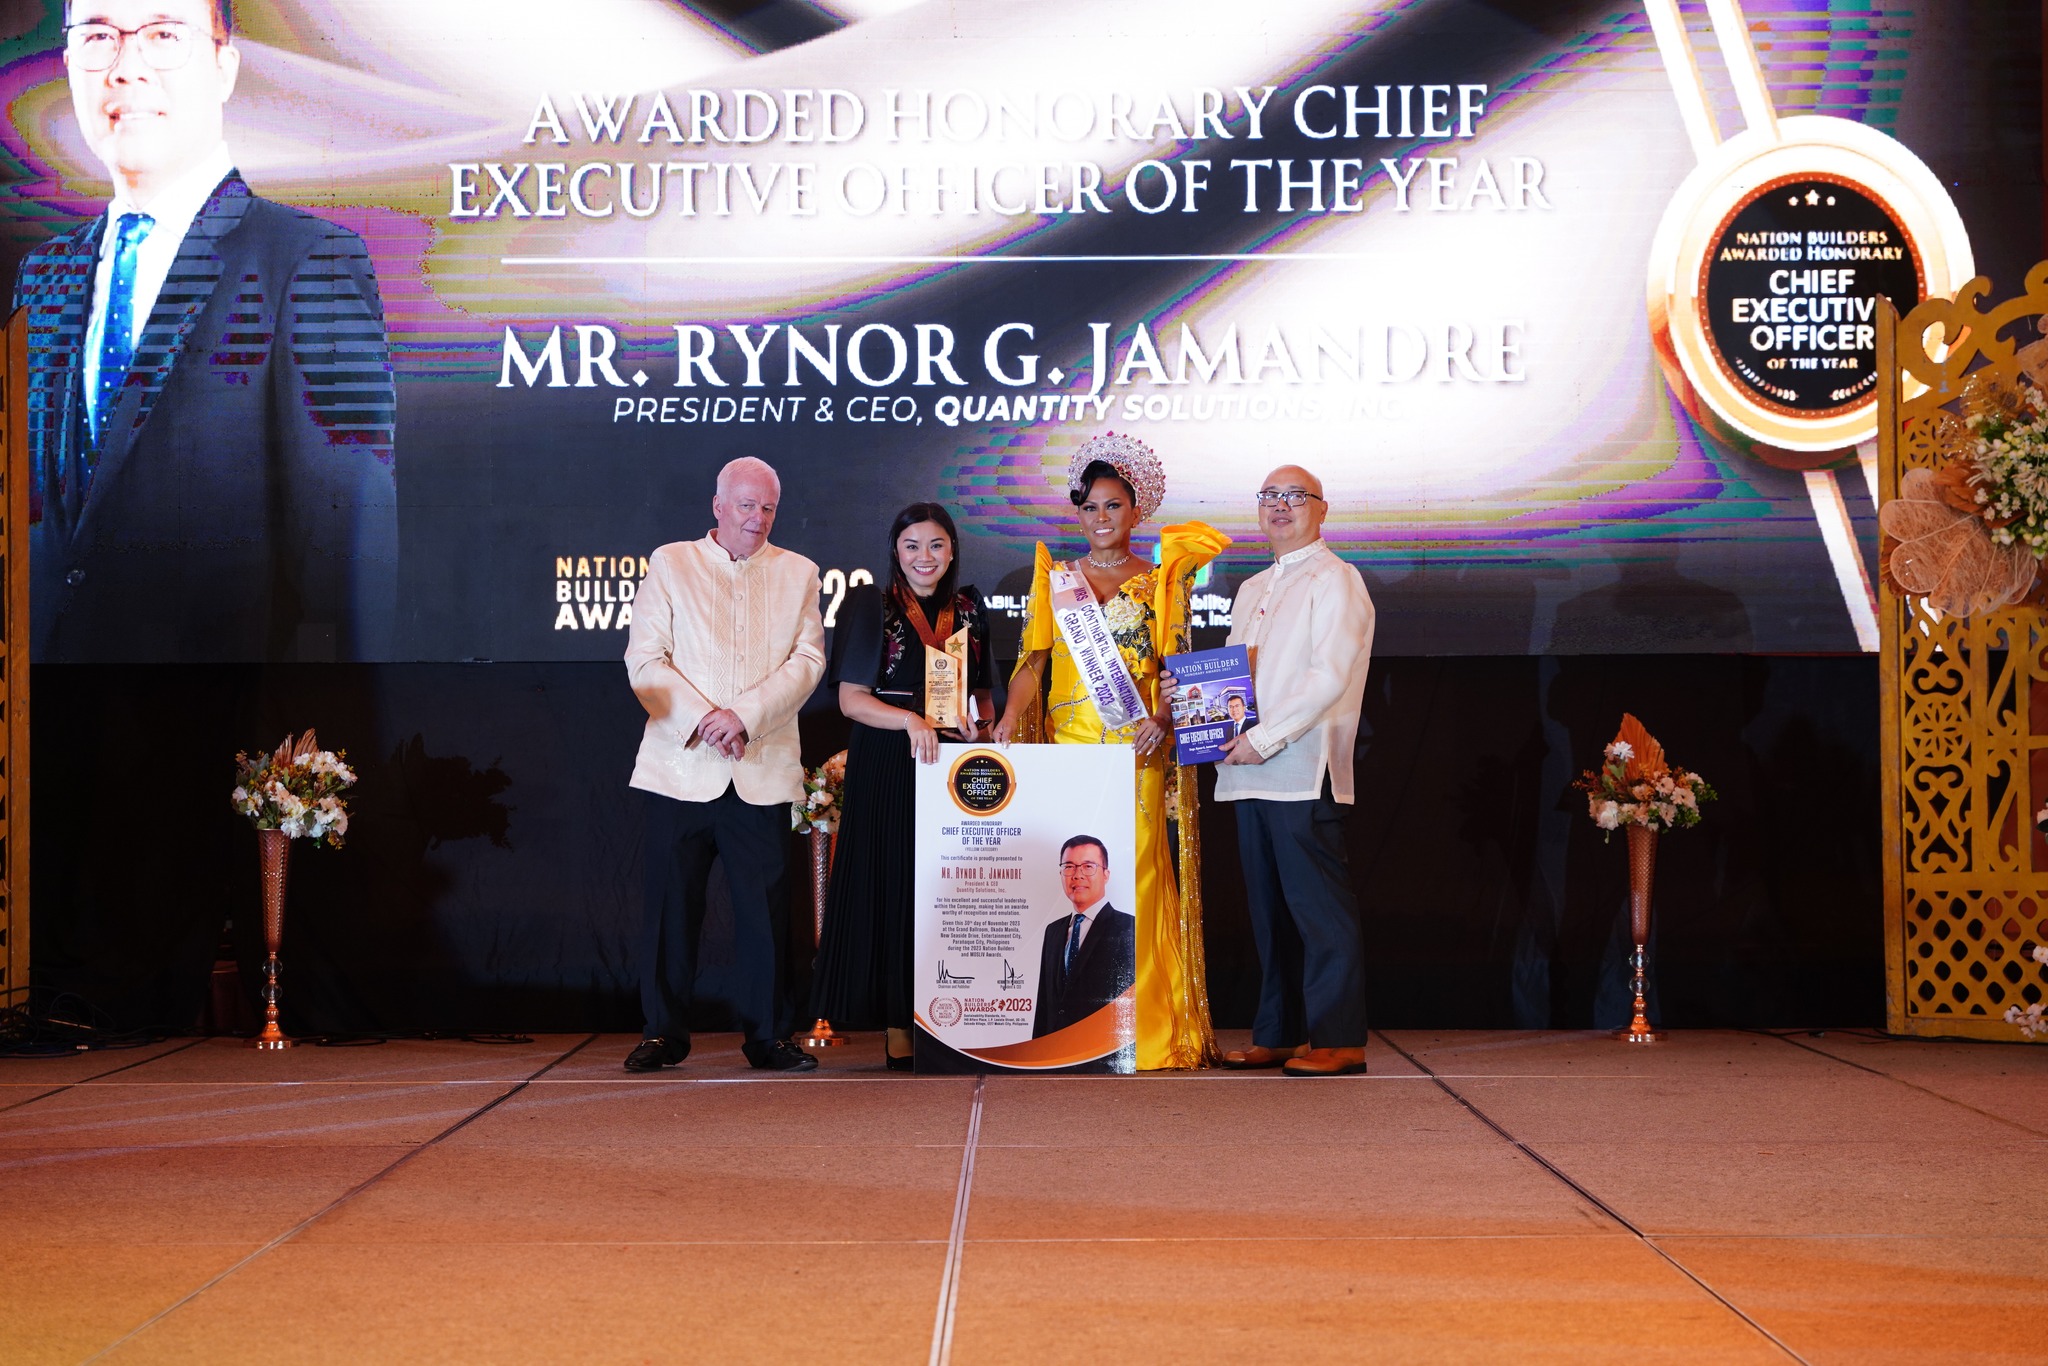 President and CEO, Engr. Rynor G. Jamandre, for being recognized as the Chief Executive Officer of the Year by Nation Builders and MOSLIV Awards